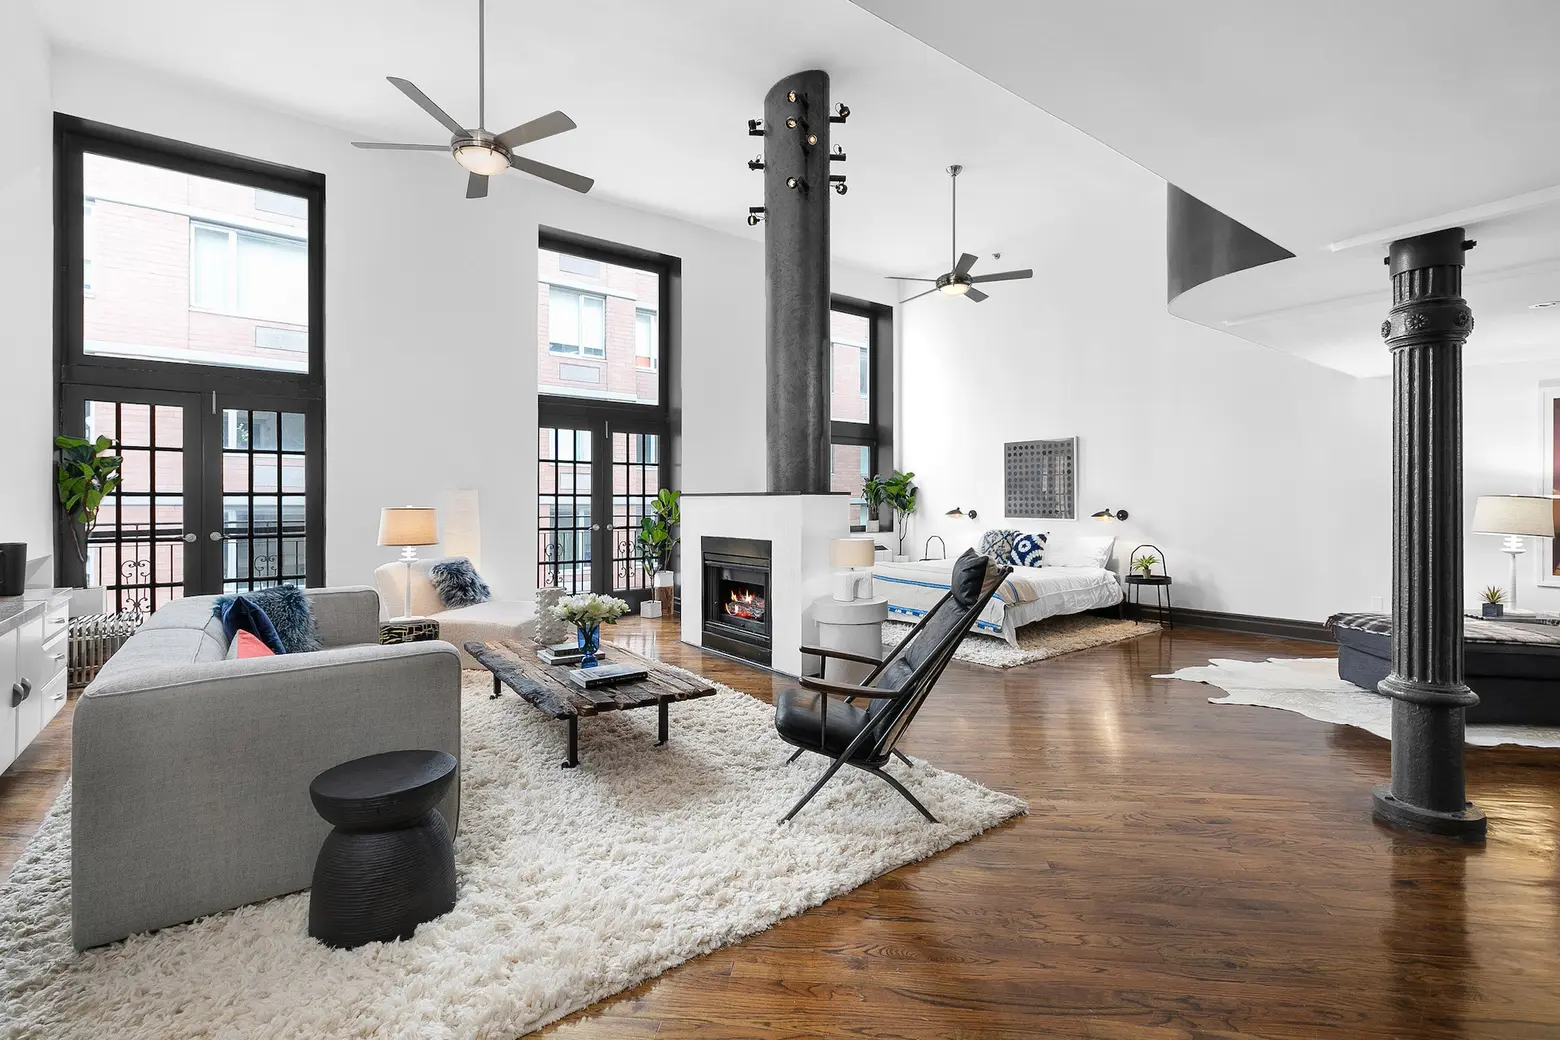 Live with or without walls in this $2.7M Chelsea duplex loft